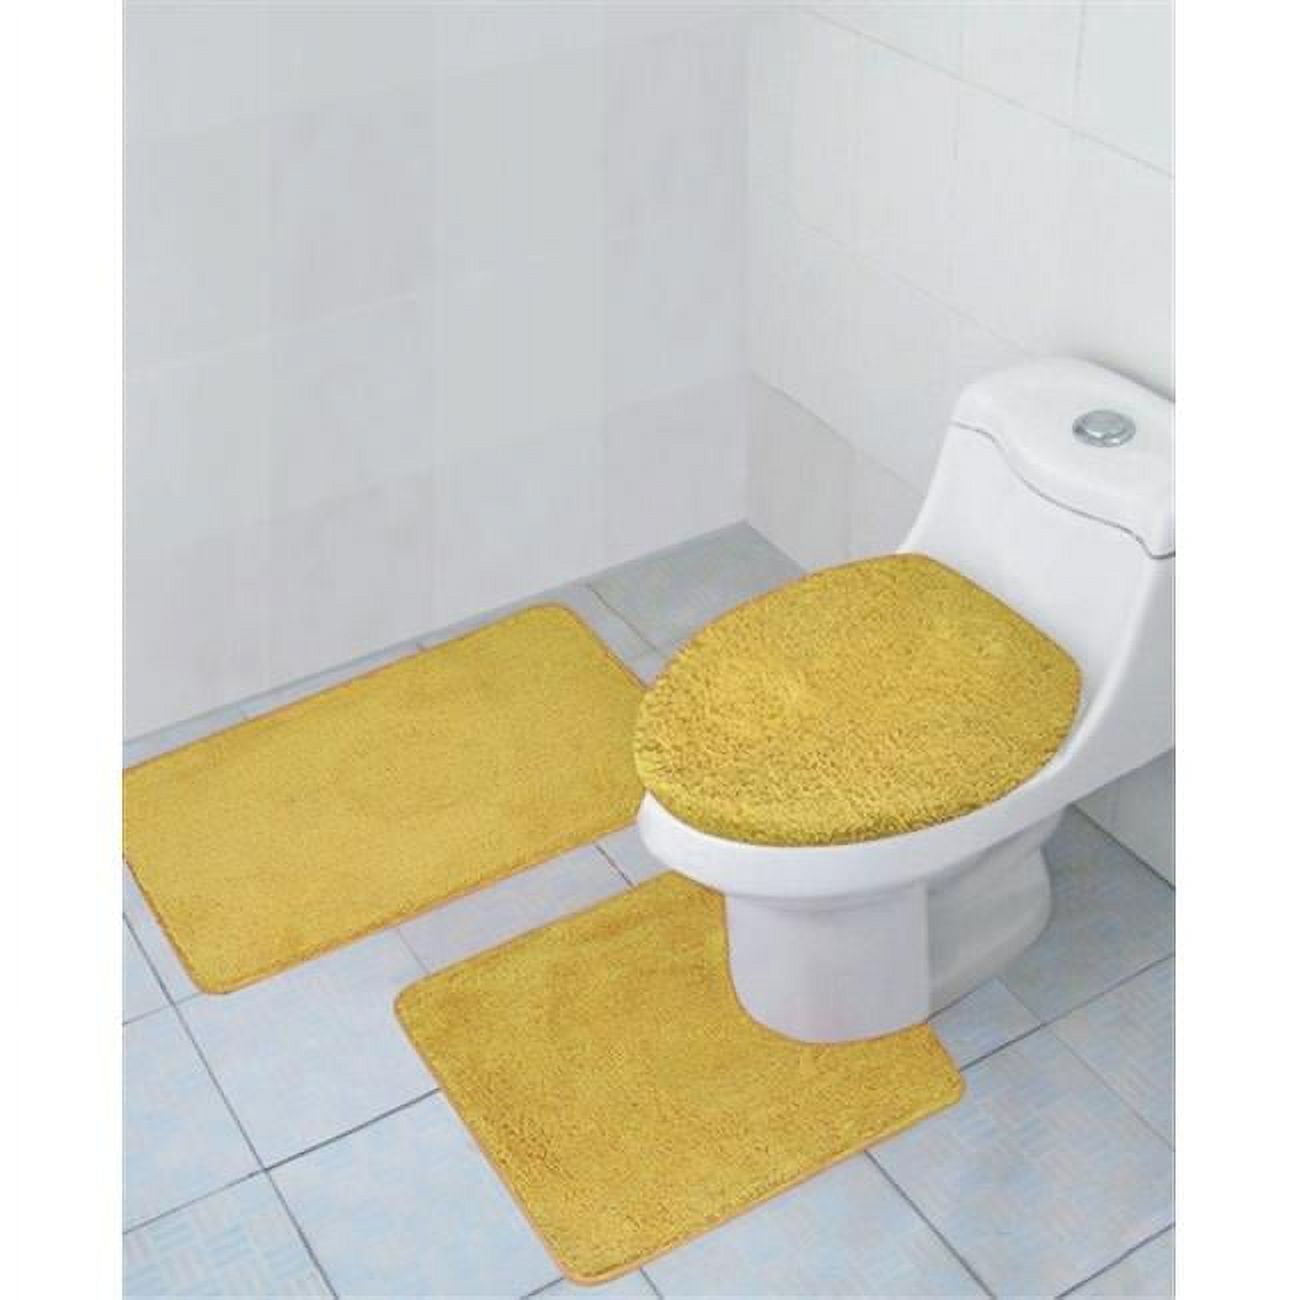 MAYSHINE Bathroom Rug Toilet Sets and Toilet Lid Cover, Extra Soft and  Absorbent Water Microfiber Mat, Beige 32 x 20/20 x 20 U-Shaped + 18 x  21 Standard Toilet Lid Cover, 2